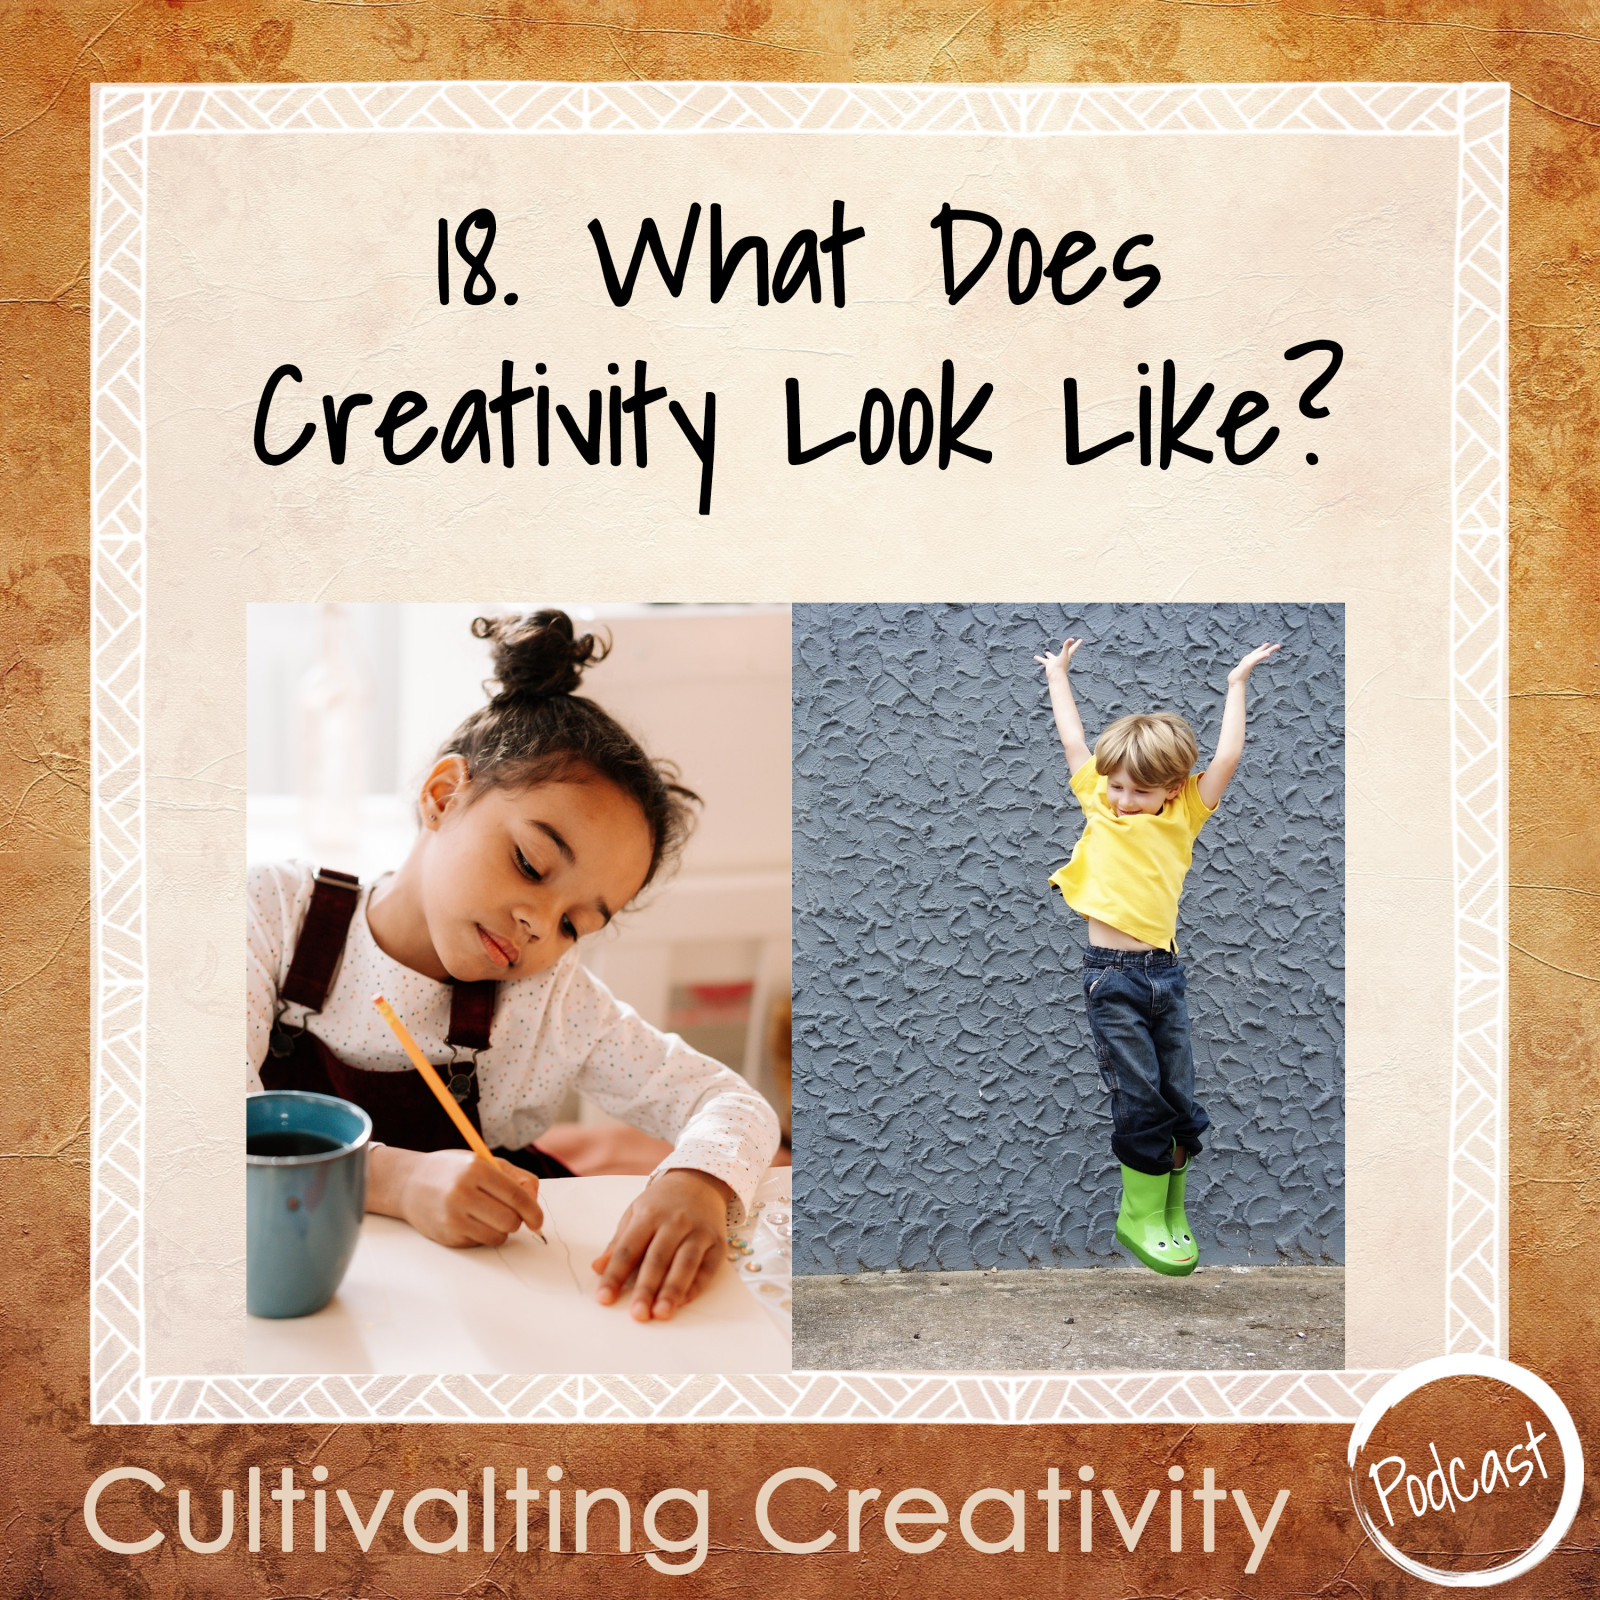 18. What Does Creativity Look Like